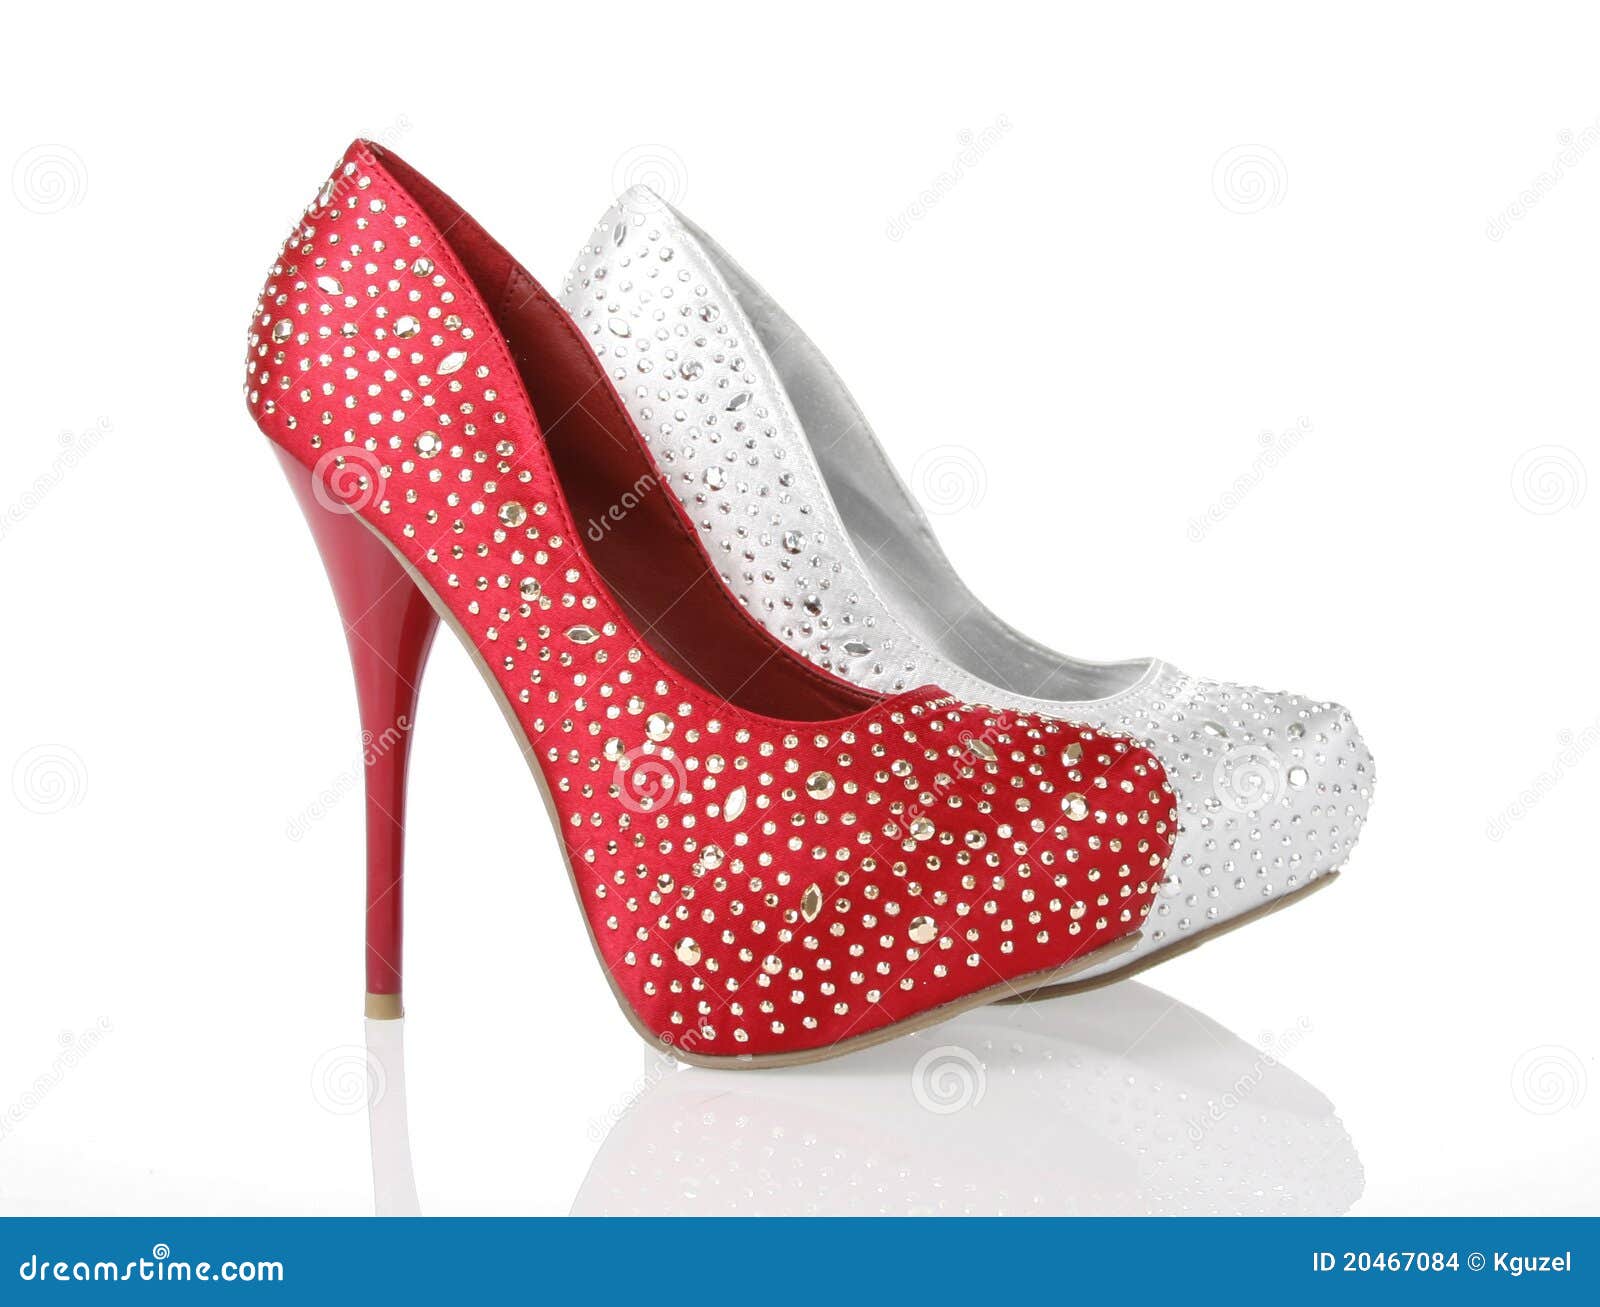 47,446 Silver Shoes Images, Stock Photos, 3D objects, & Vectors